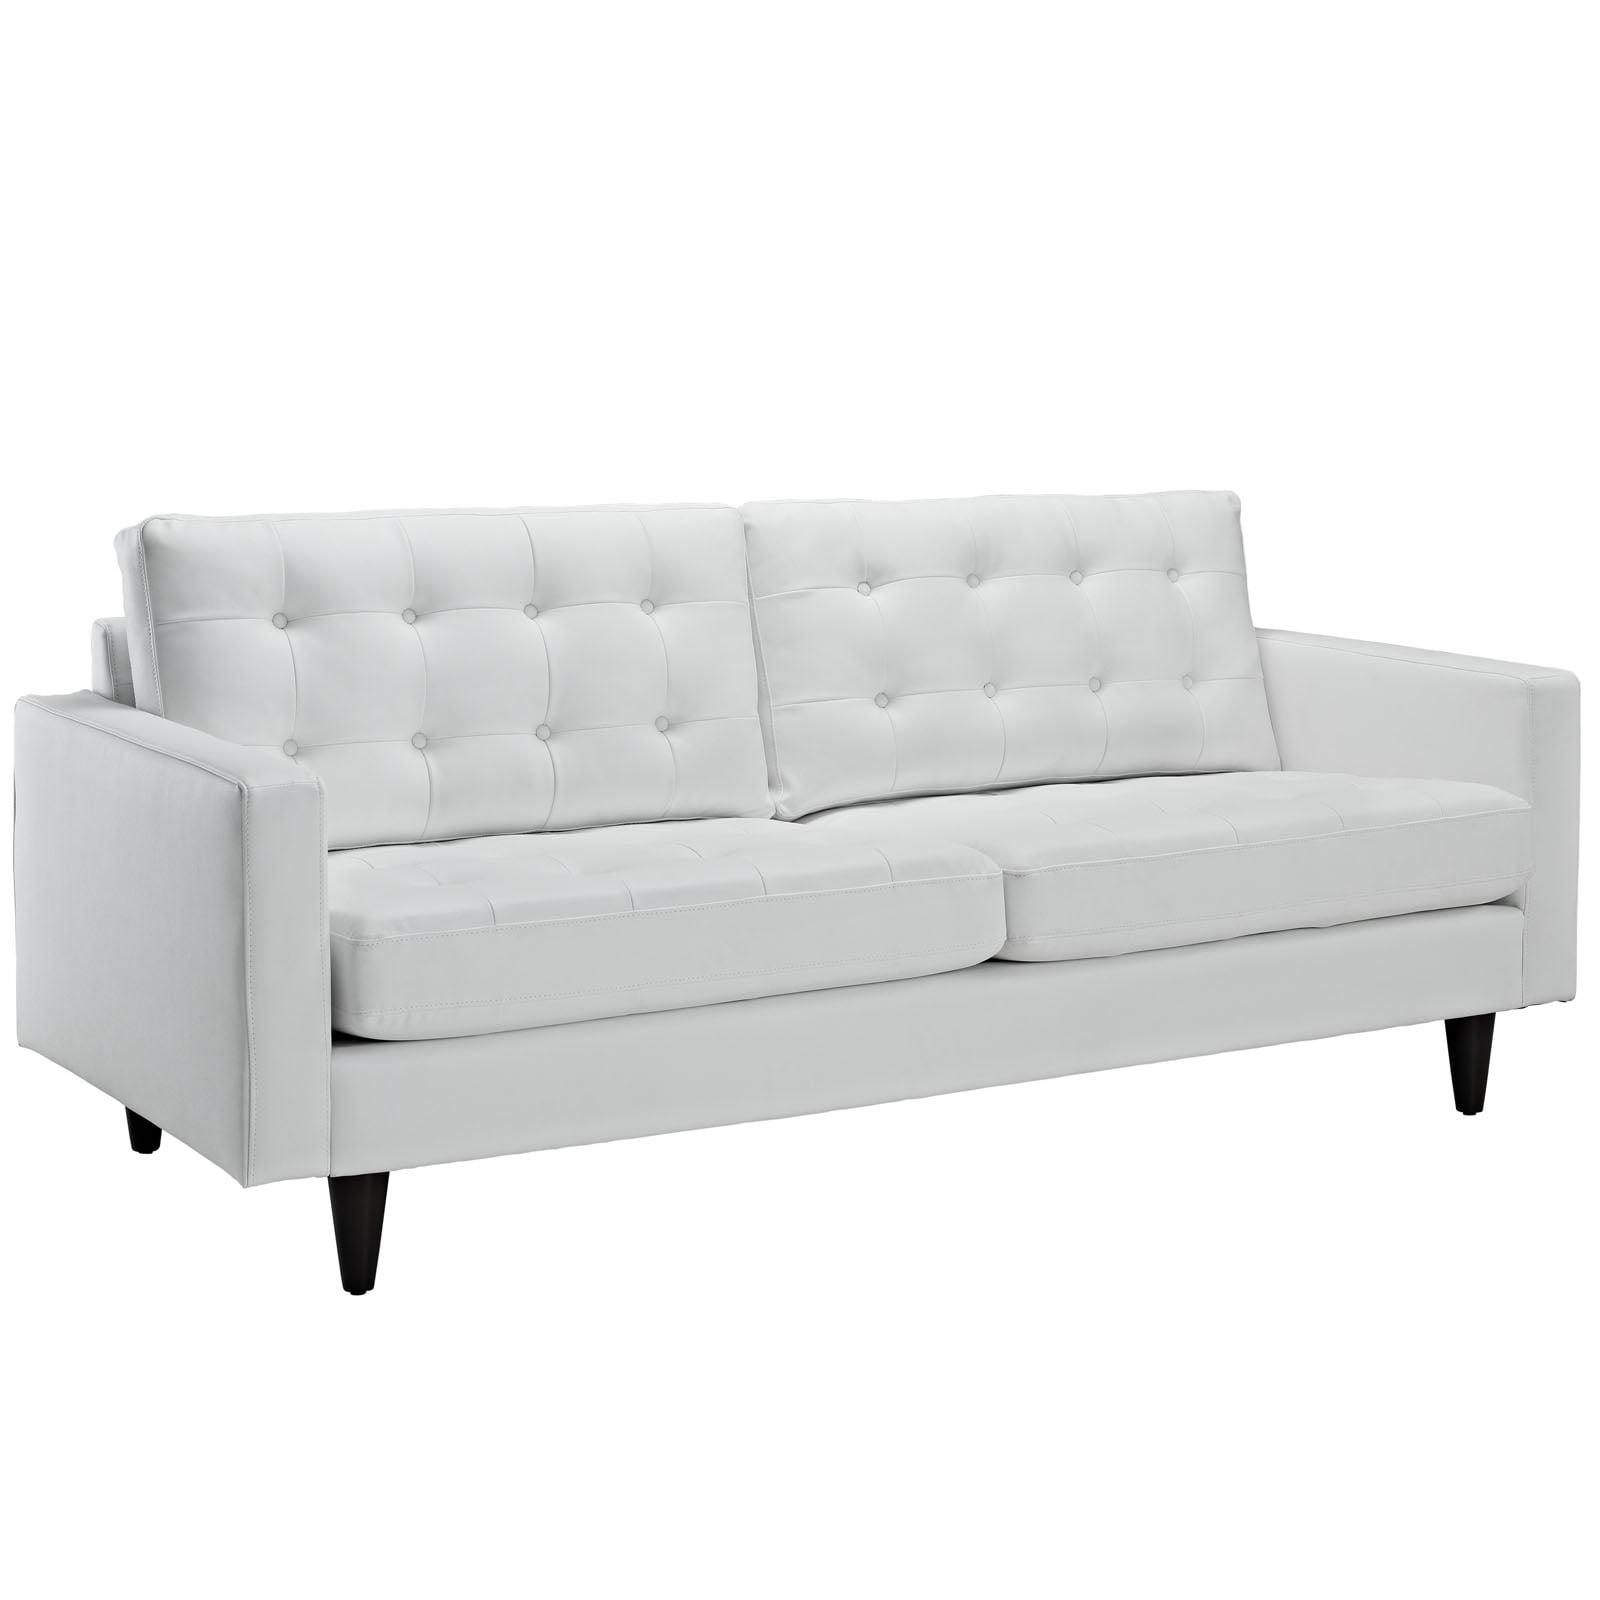 Modern Contemporary Living Room Leather, Leather Lounge Sofa White